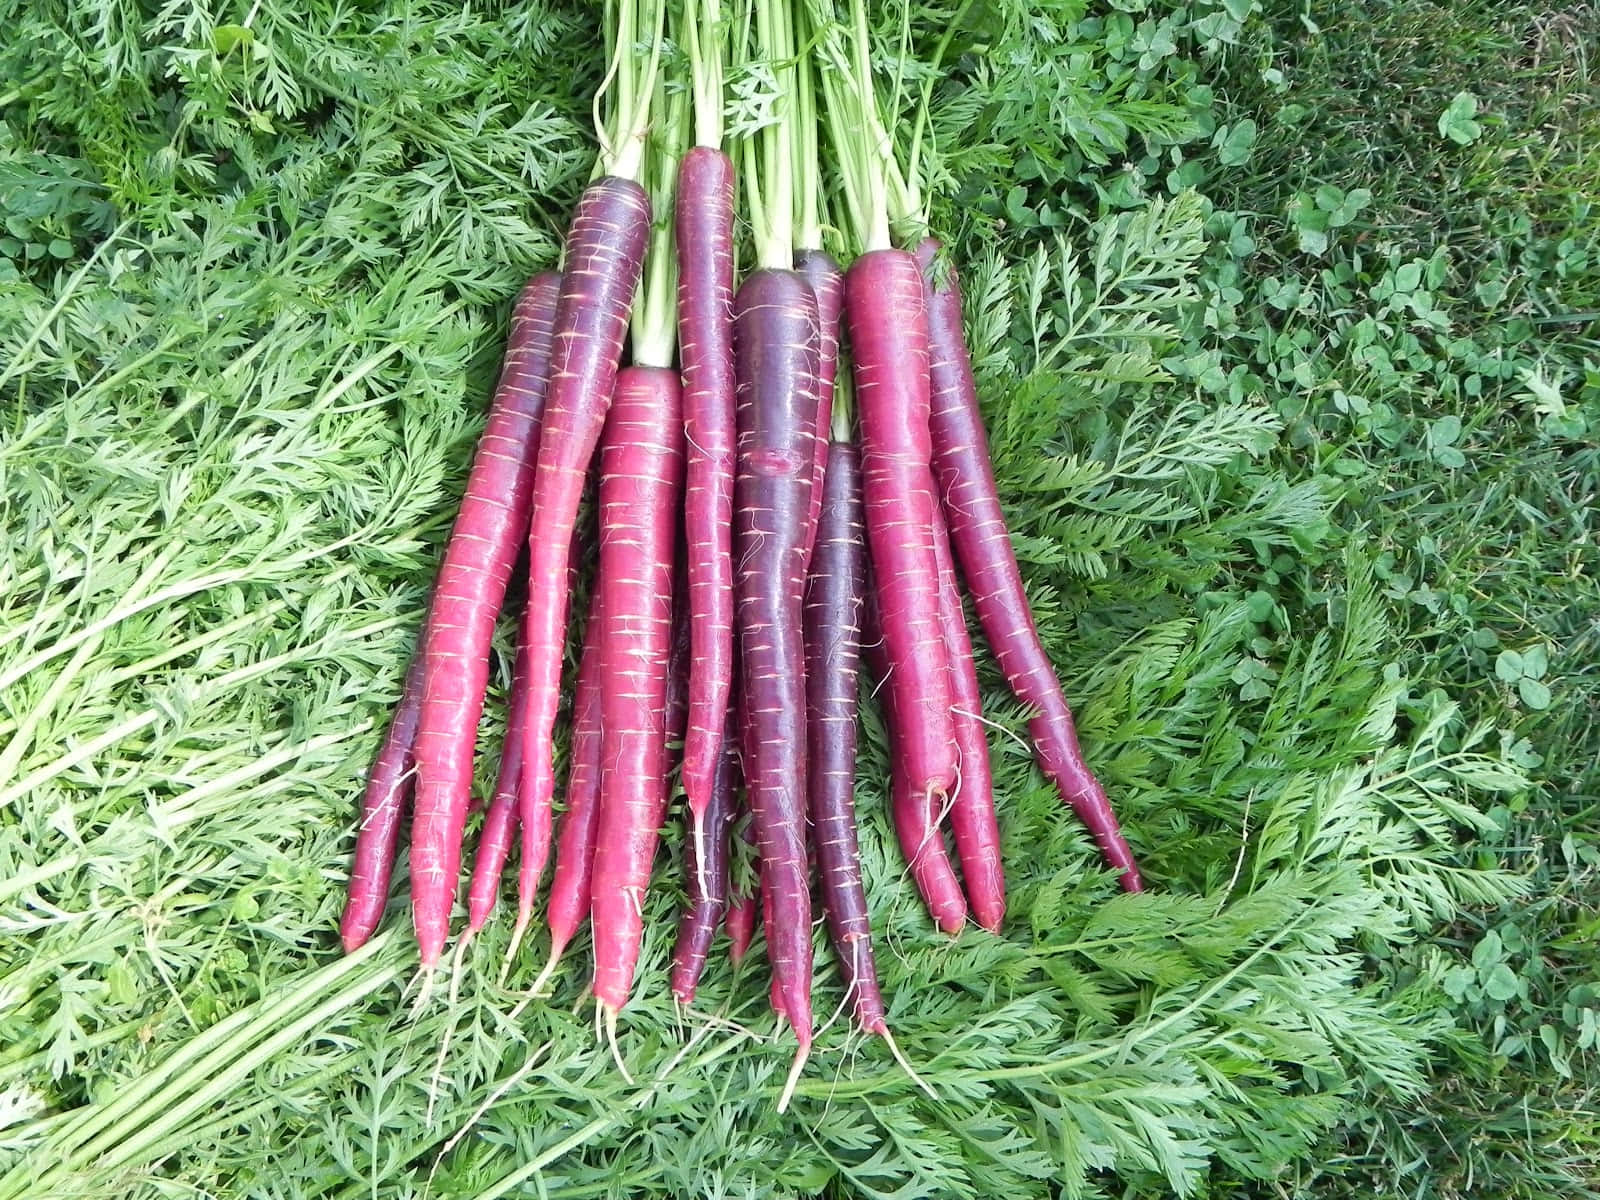 Purple Carrots - A Colorful and Nutritious Snack Wallpaper